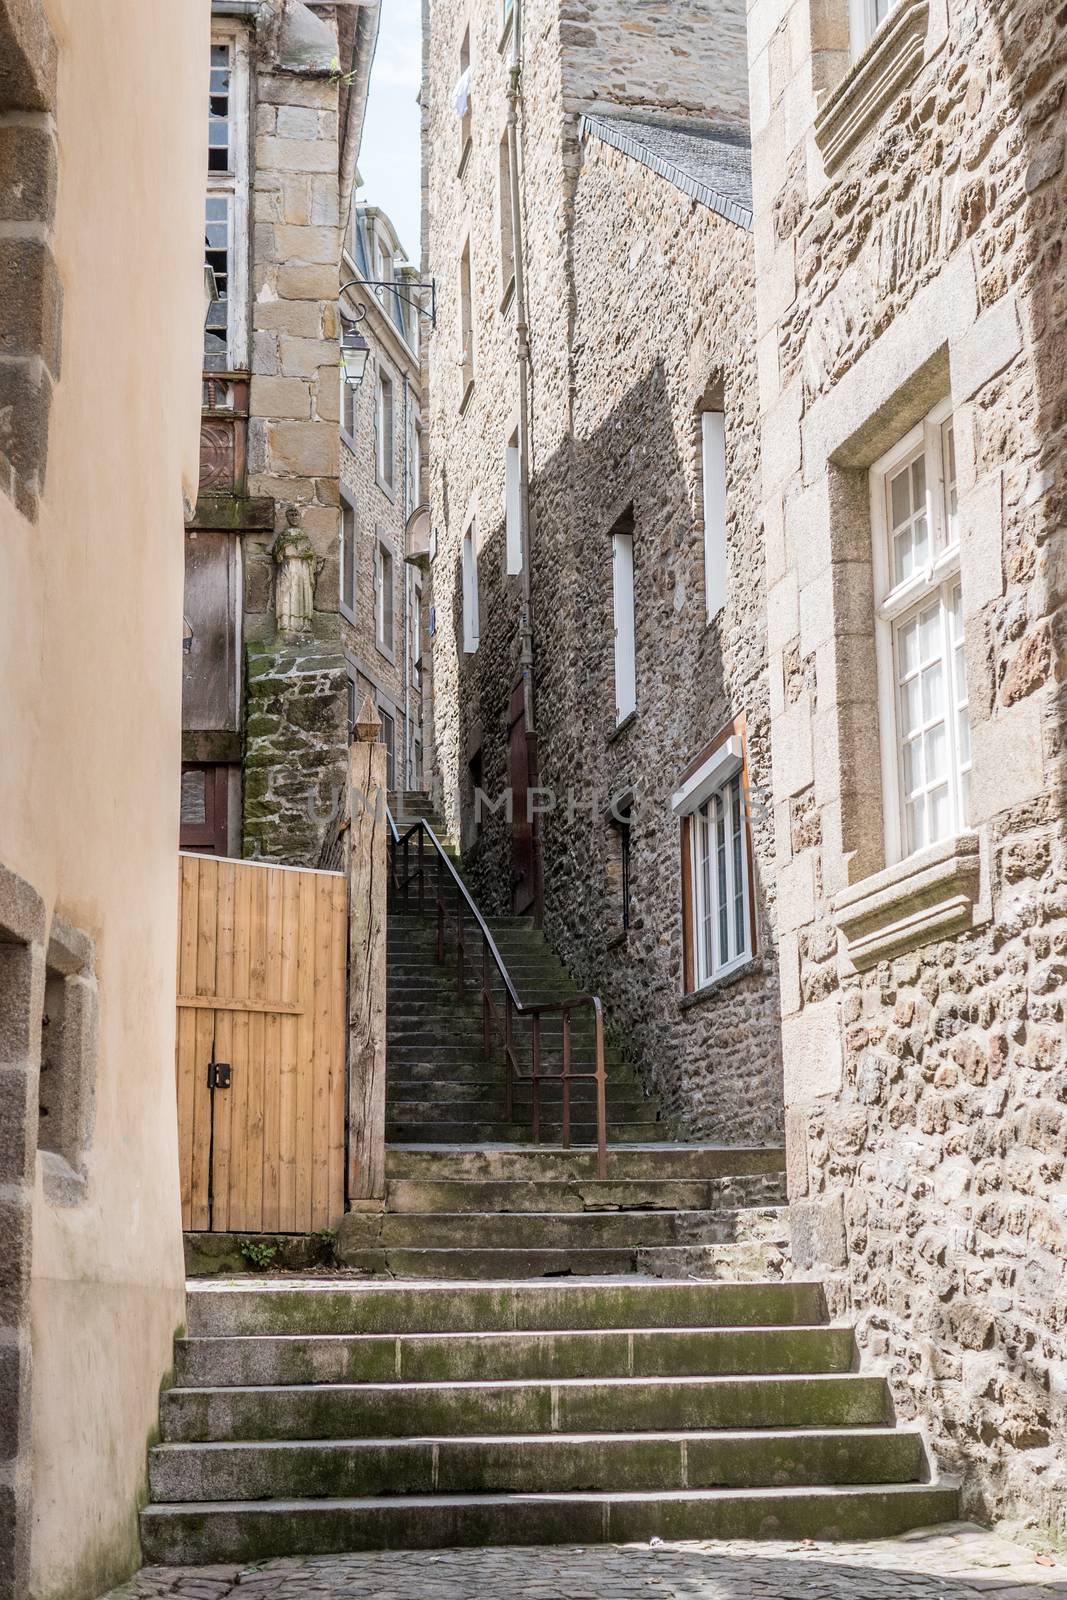 Buildings and stairs in the old part city of Saint Malo, France by ontheroadagain